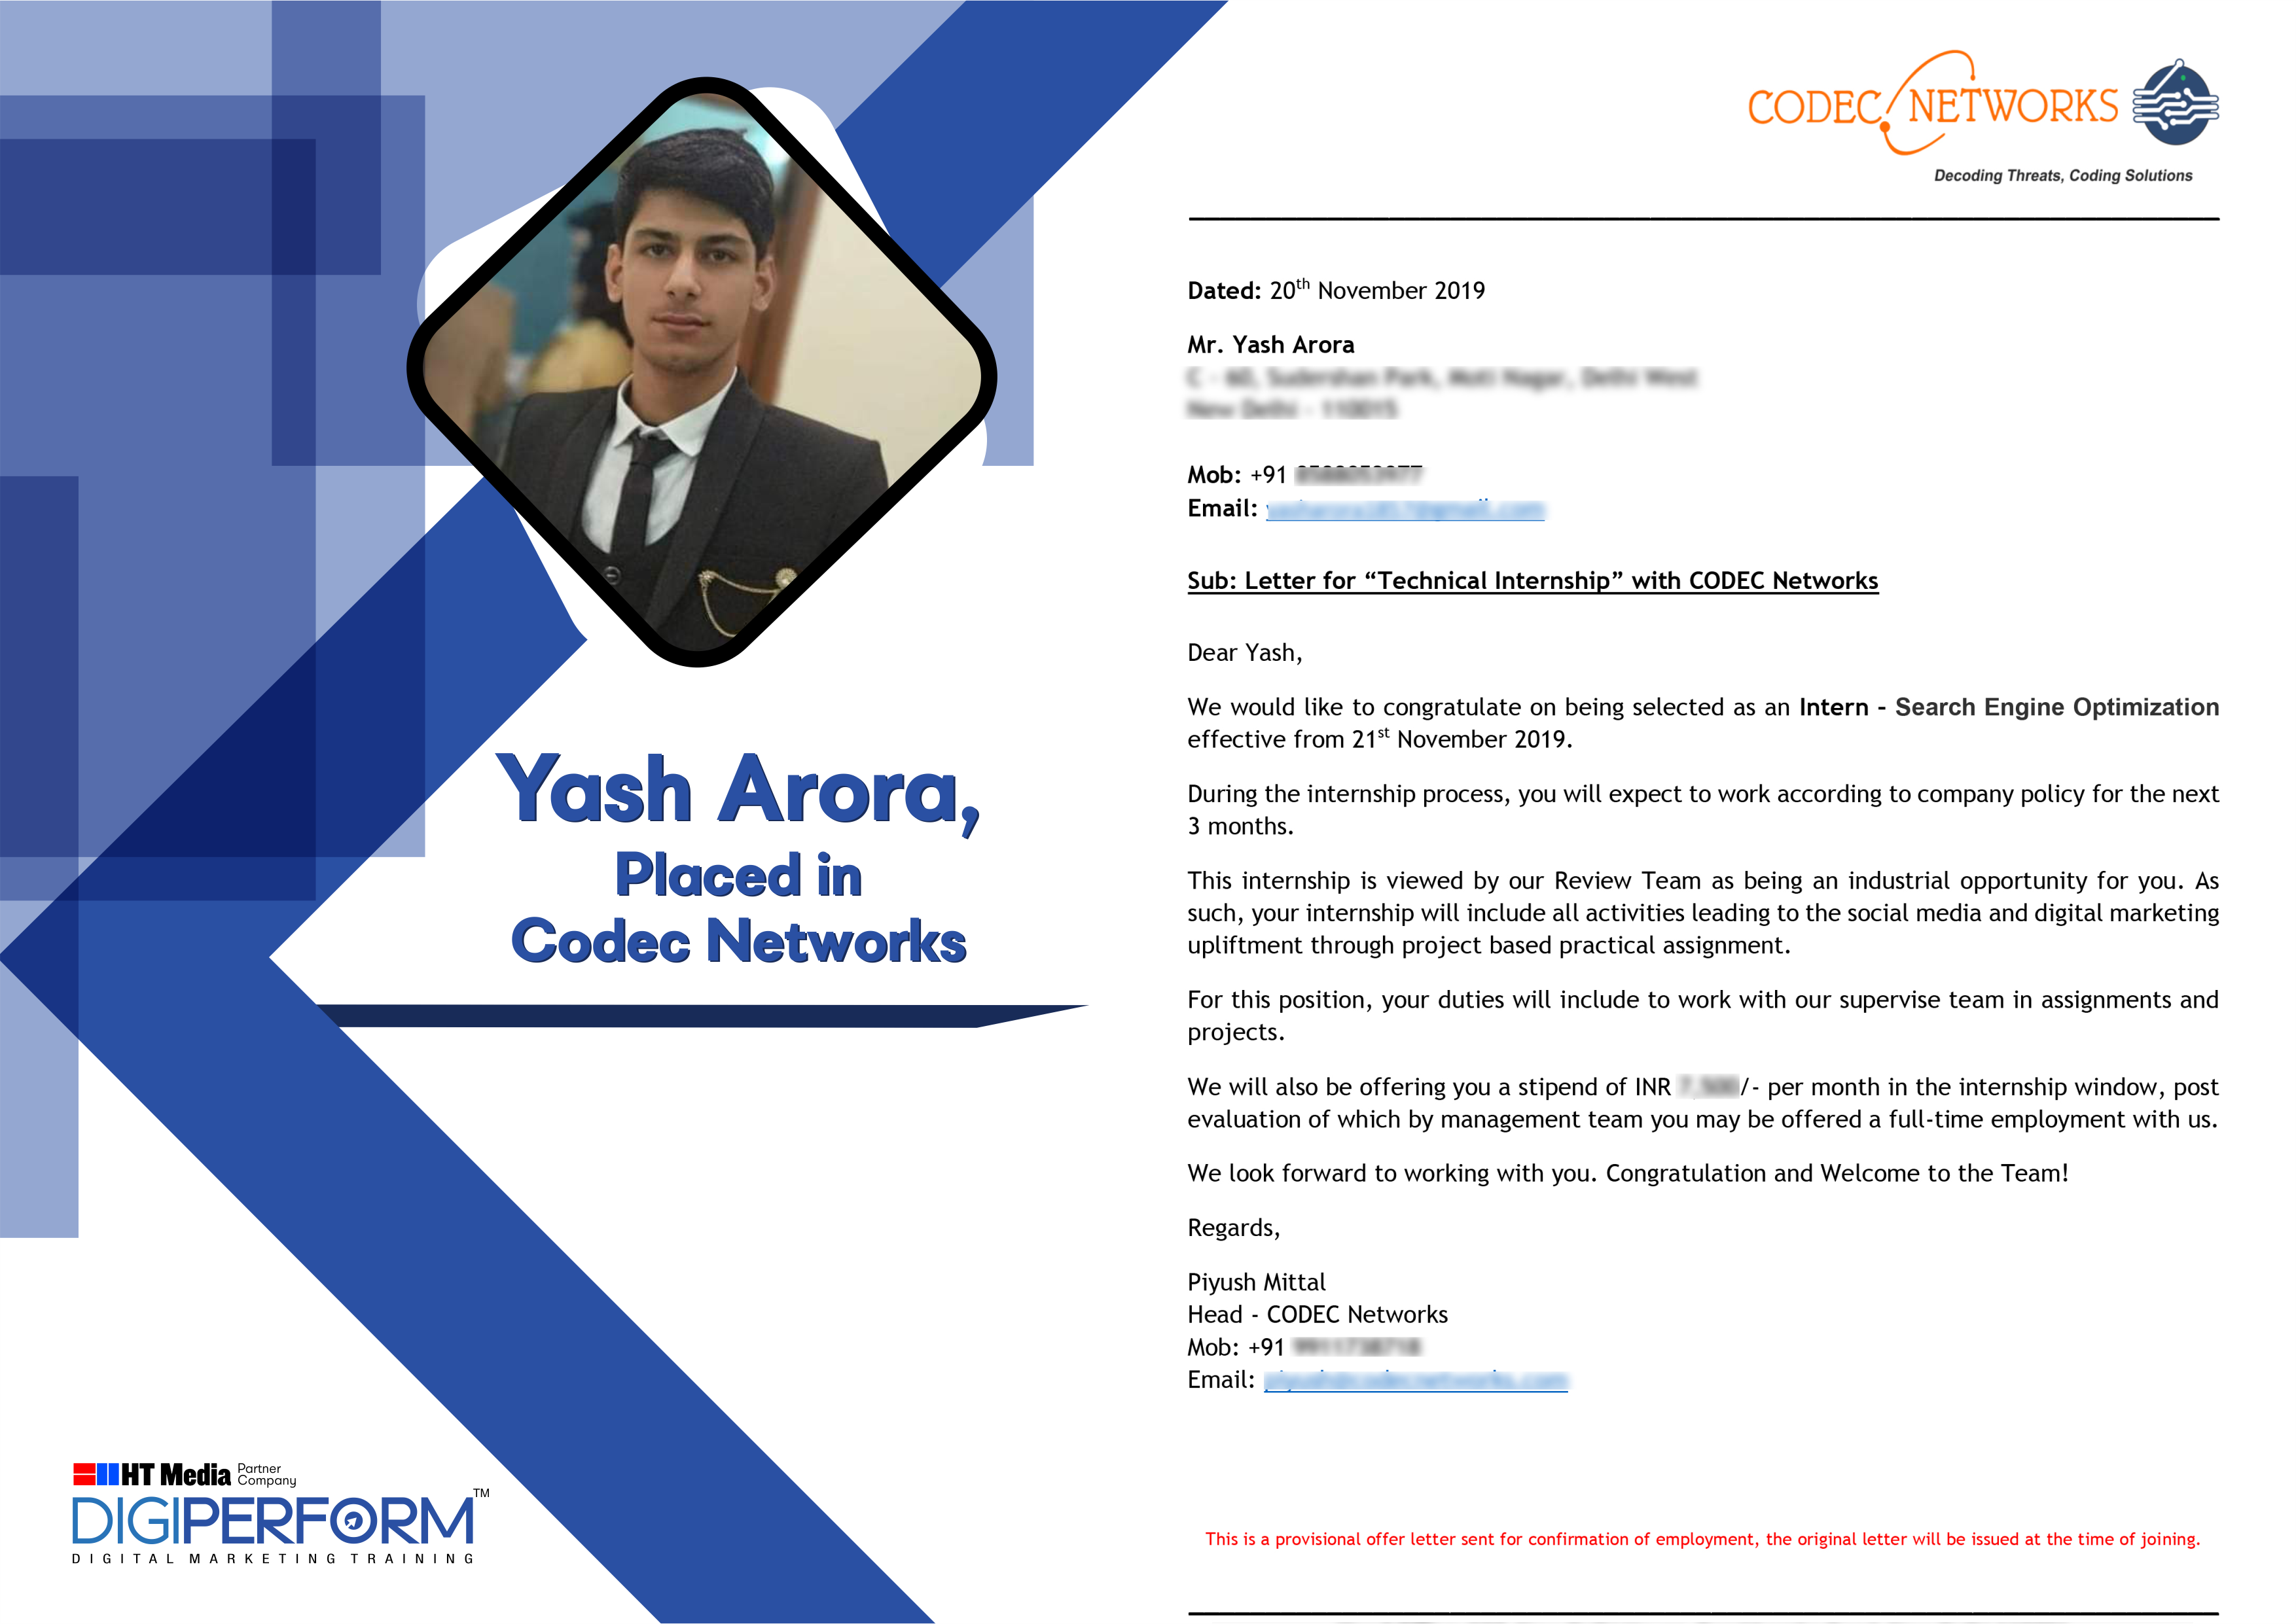 Digiperform Students - Yash Arora placed in Codec Networks